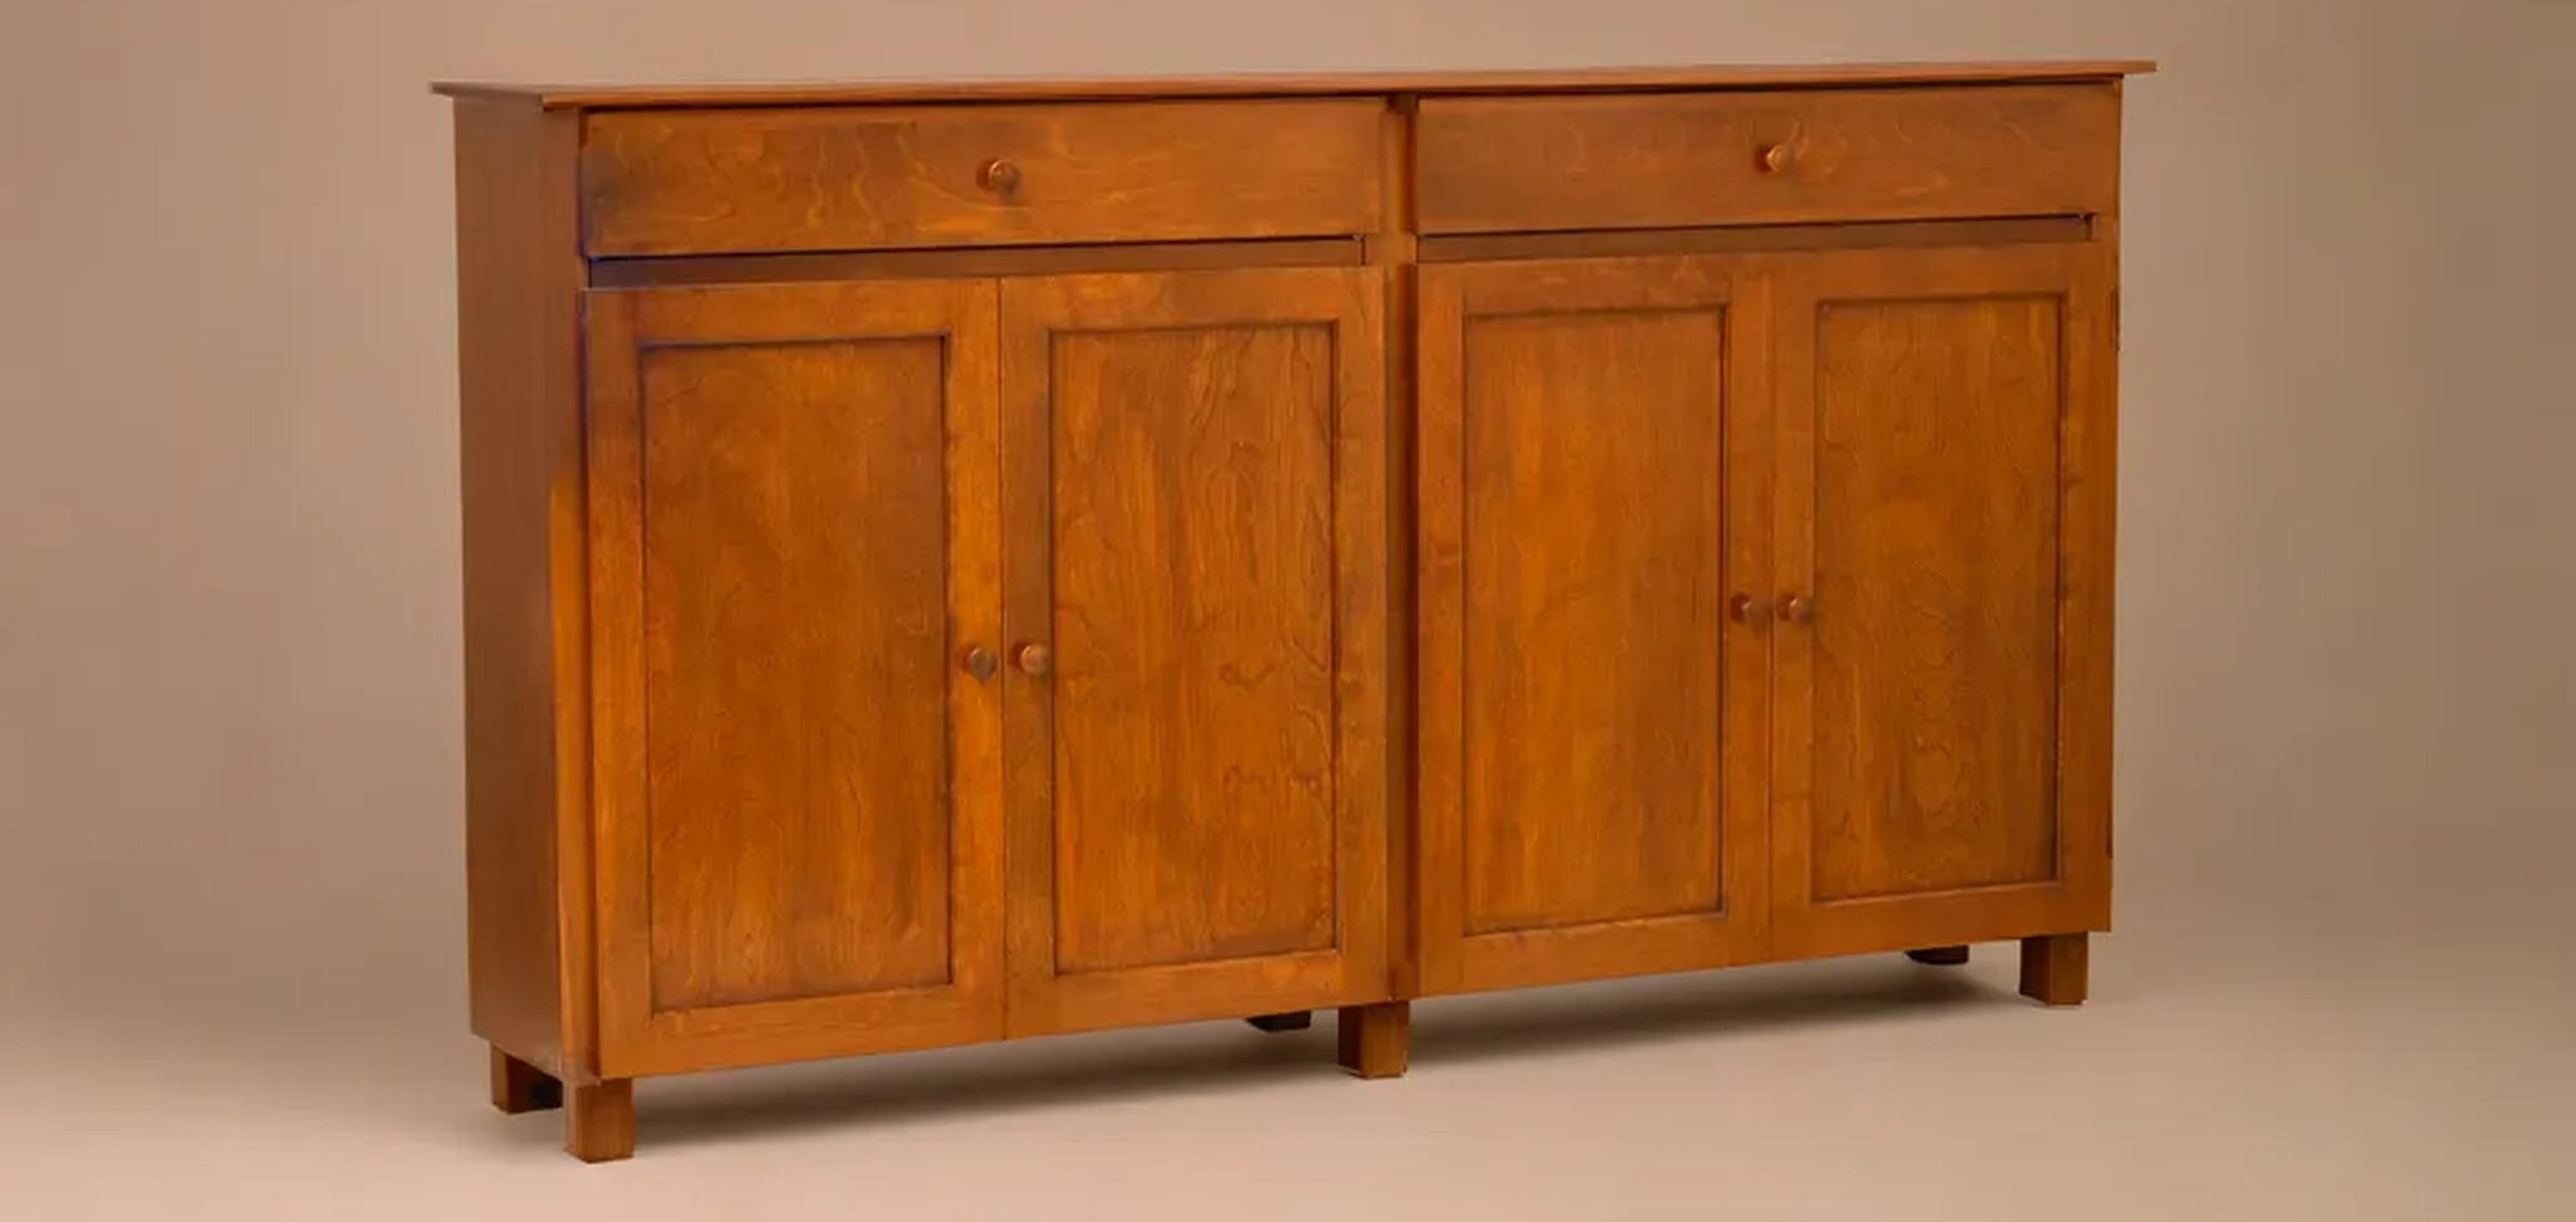 Buffet cabinet with four doors, two drawers, and small square legs in birch wood and stained shown from the front.